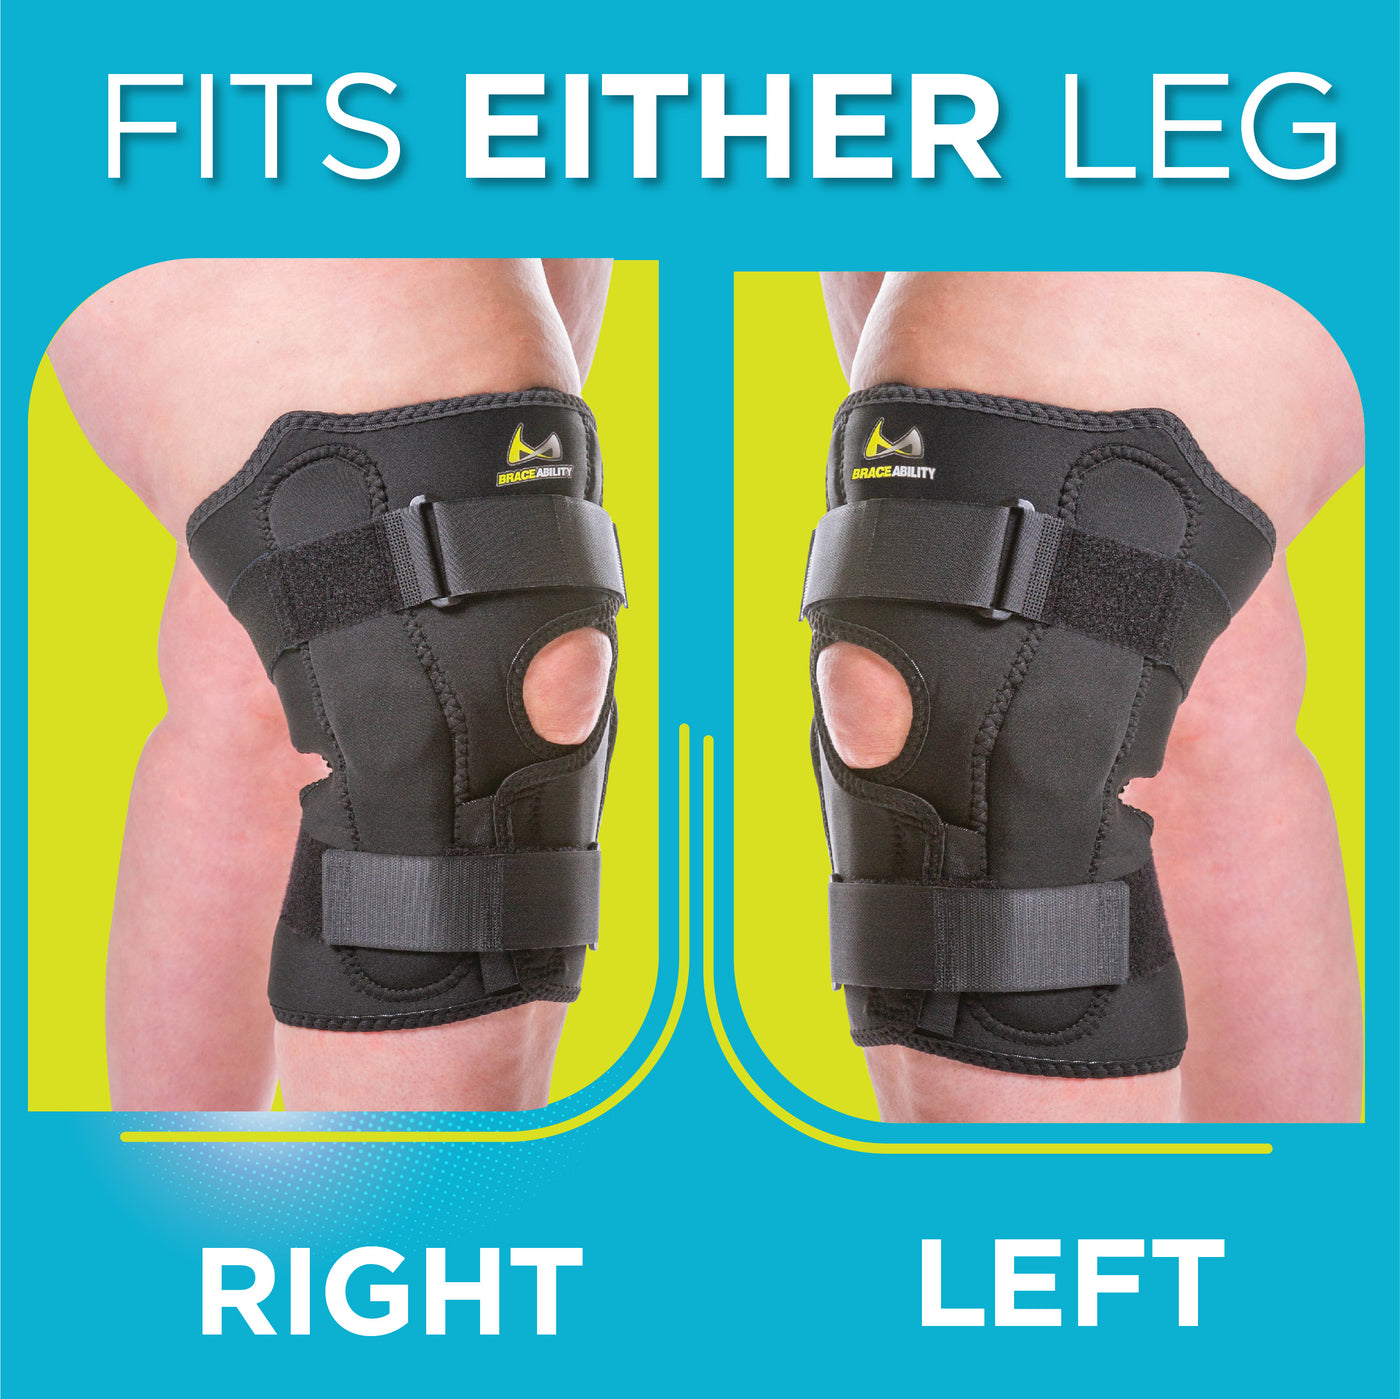 The wrap around straps for the obesity plus size knee brace make the brace fit either right or left leg